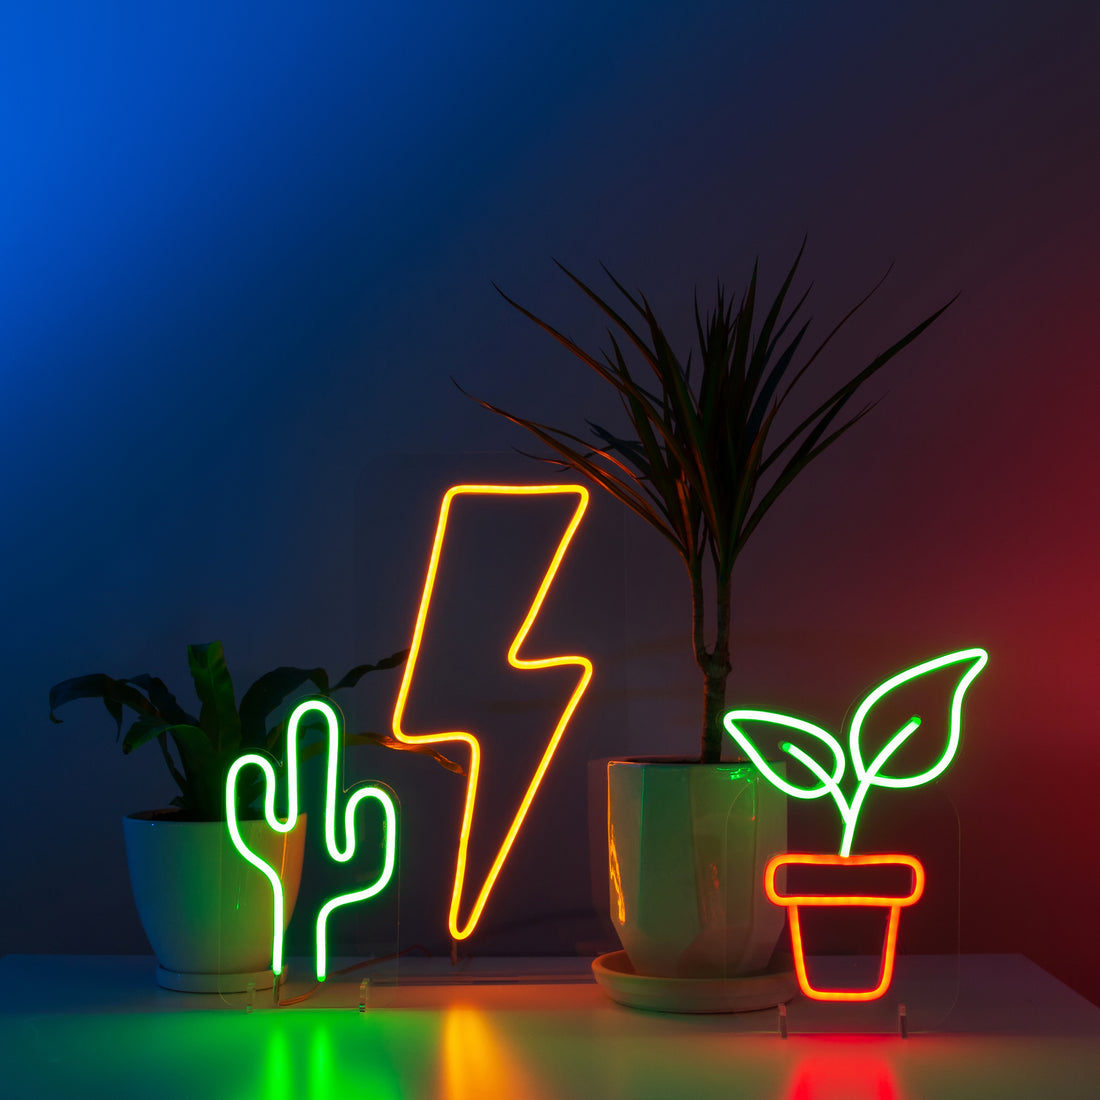 Ways to decorate your home with mini neon signs